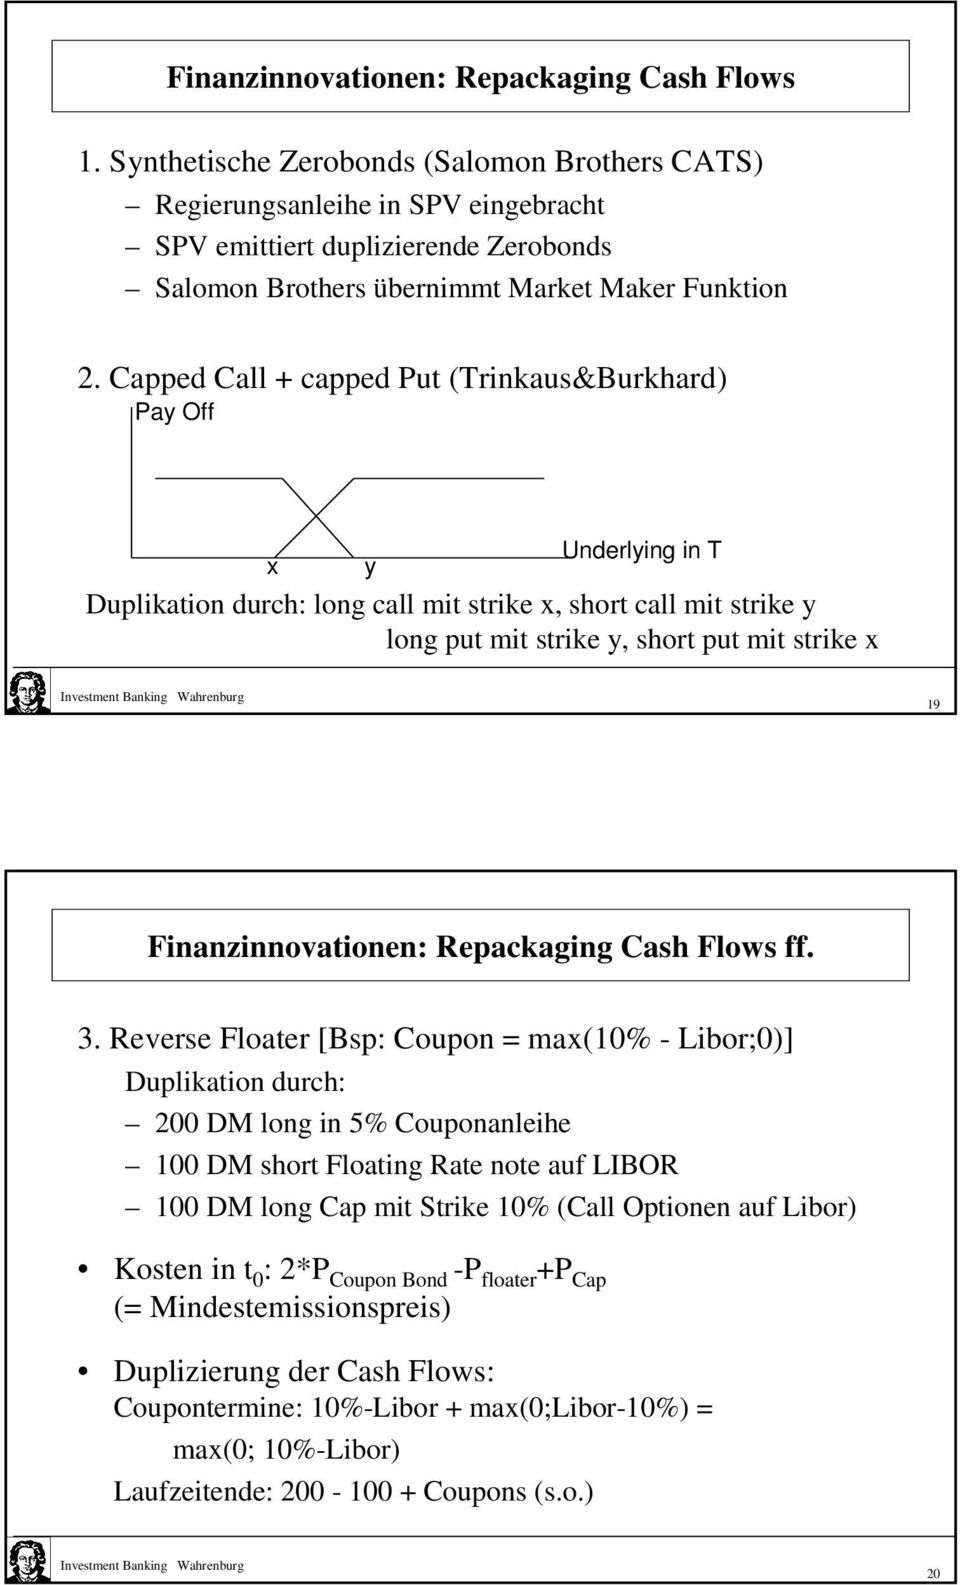 Capped Call + capped Put (Trinkaus&Burkhard) Pay Off x y Underlying in T Duplikation durch: long call mit strike x, short call mit strike y long put mit strike y, short put mit strike x 19